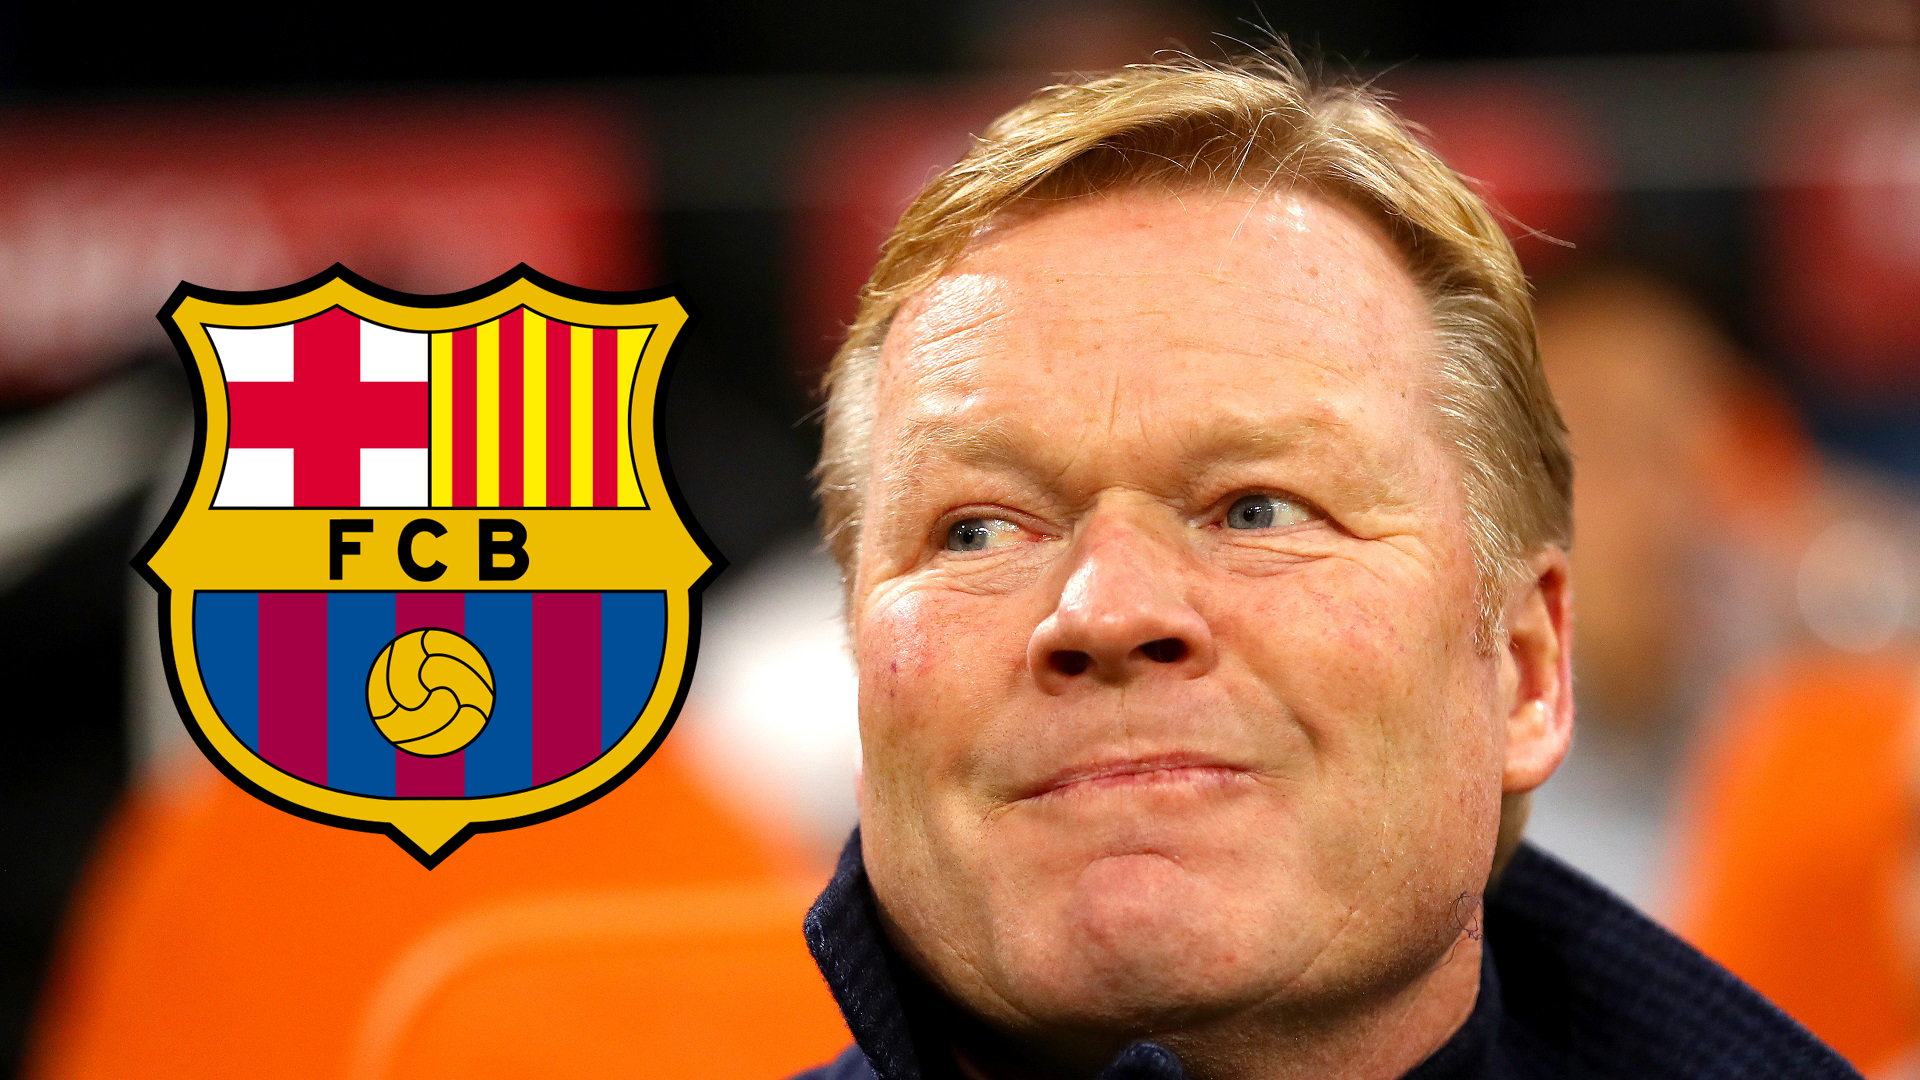 Koeman: Hopefully I can coach Barcelona one day but timing hasn’t been right so far